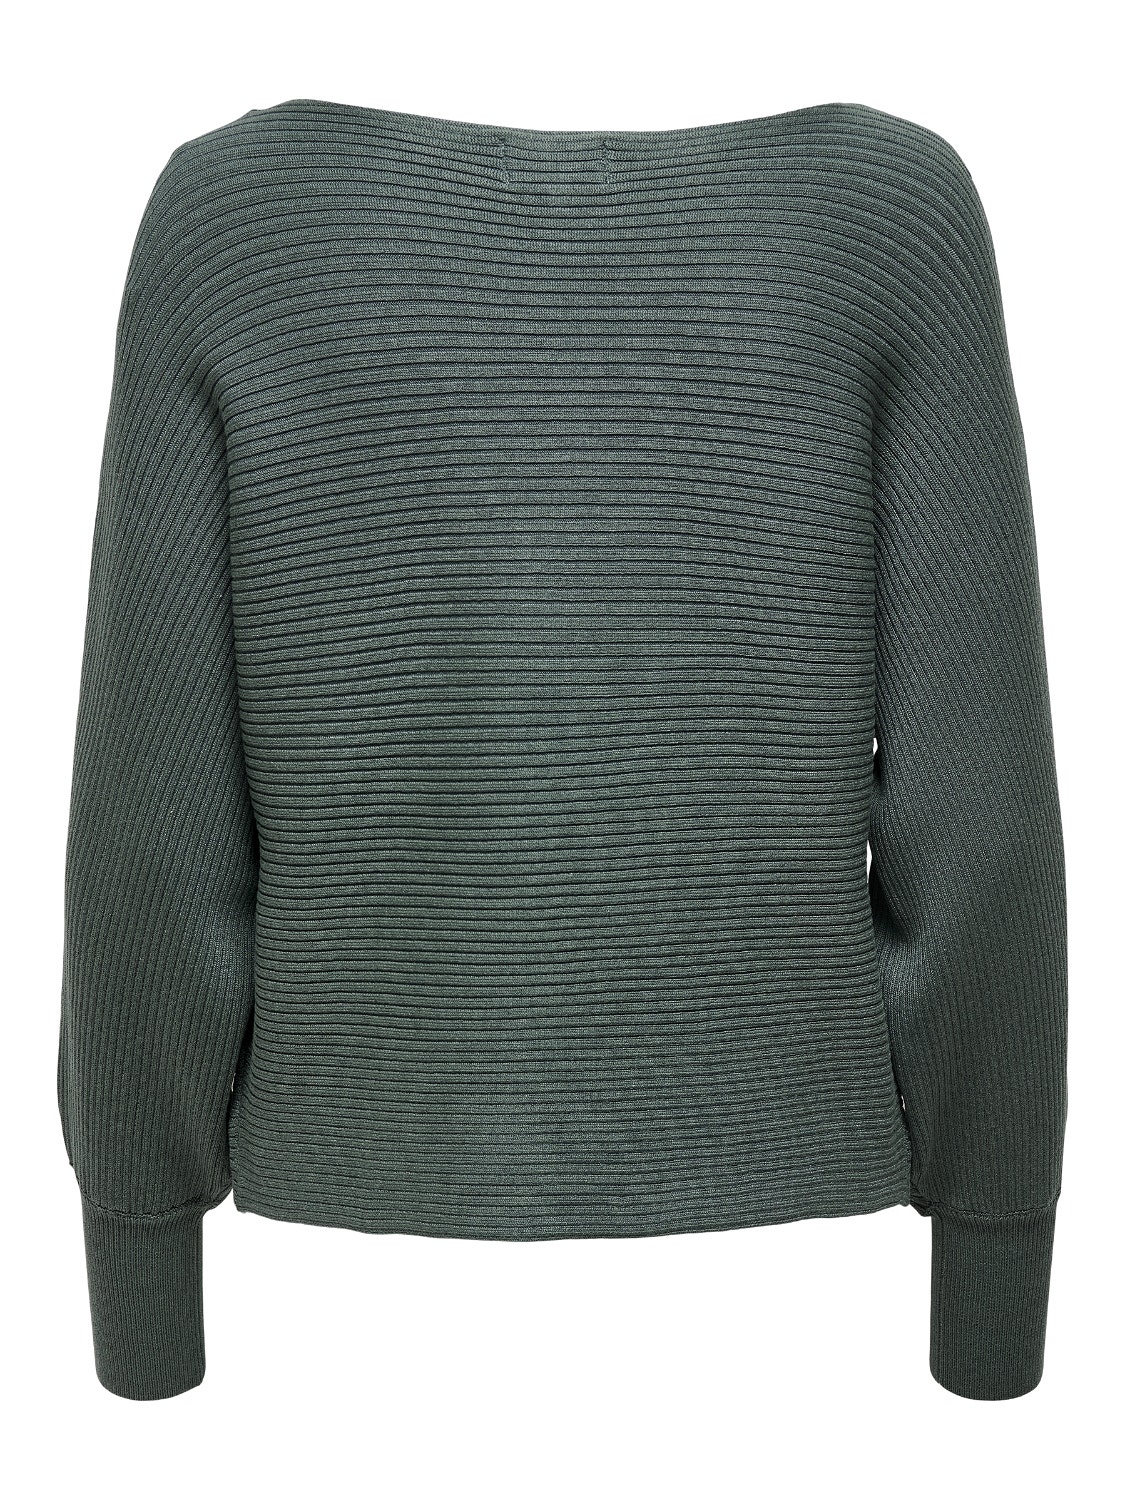 ONLY Pull-overs Col bateau Bas hauts -Balsam Green - 15226298